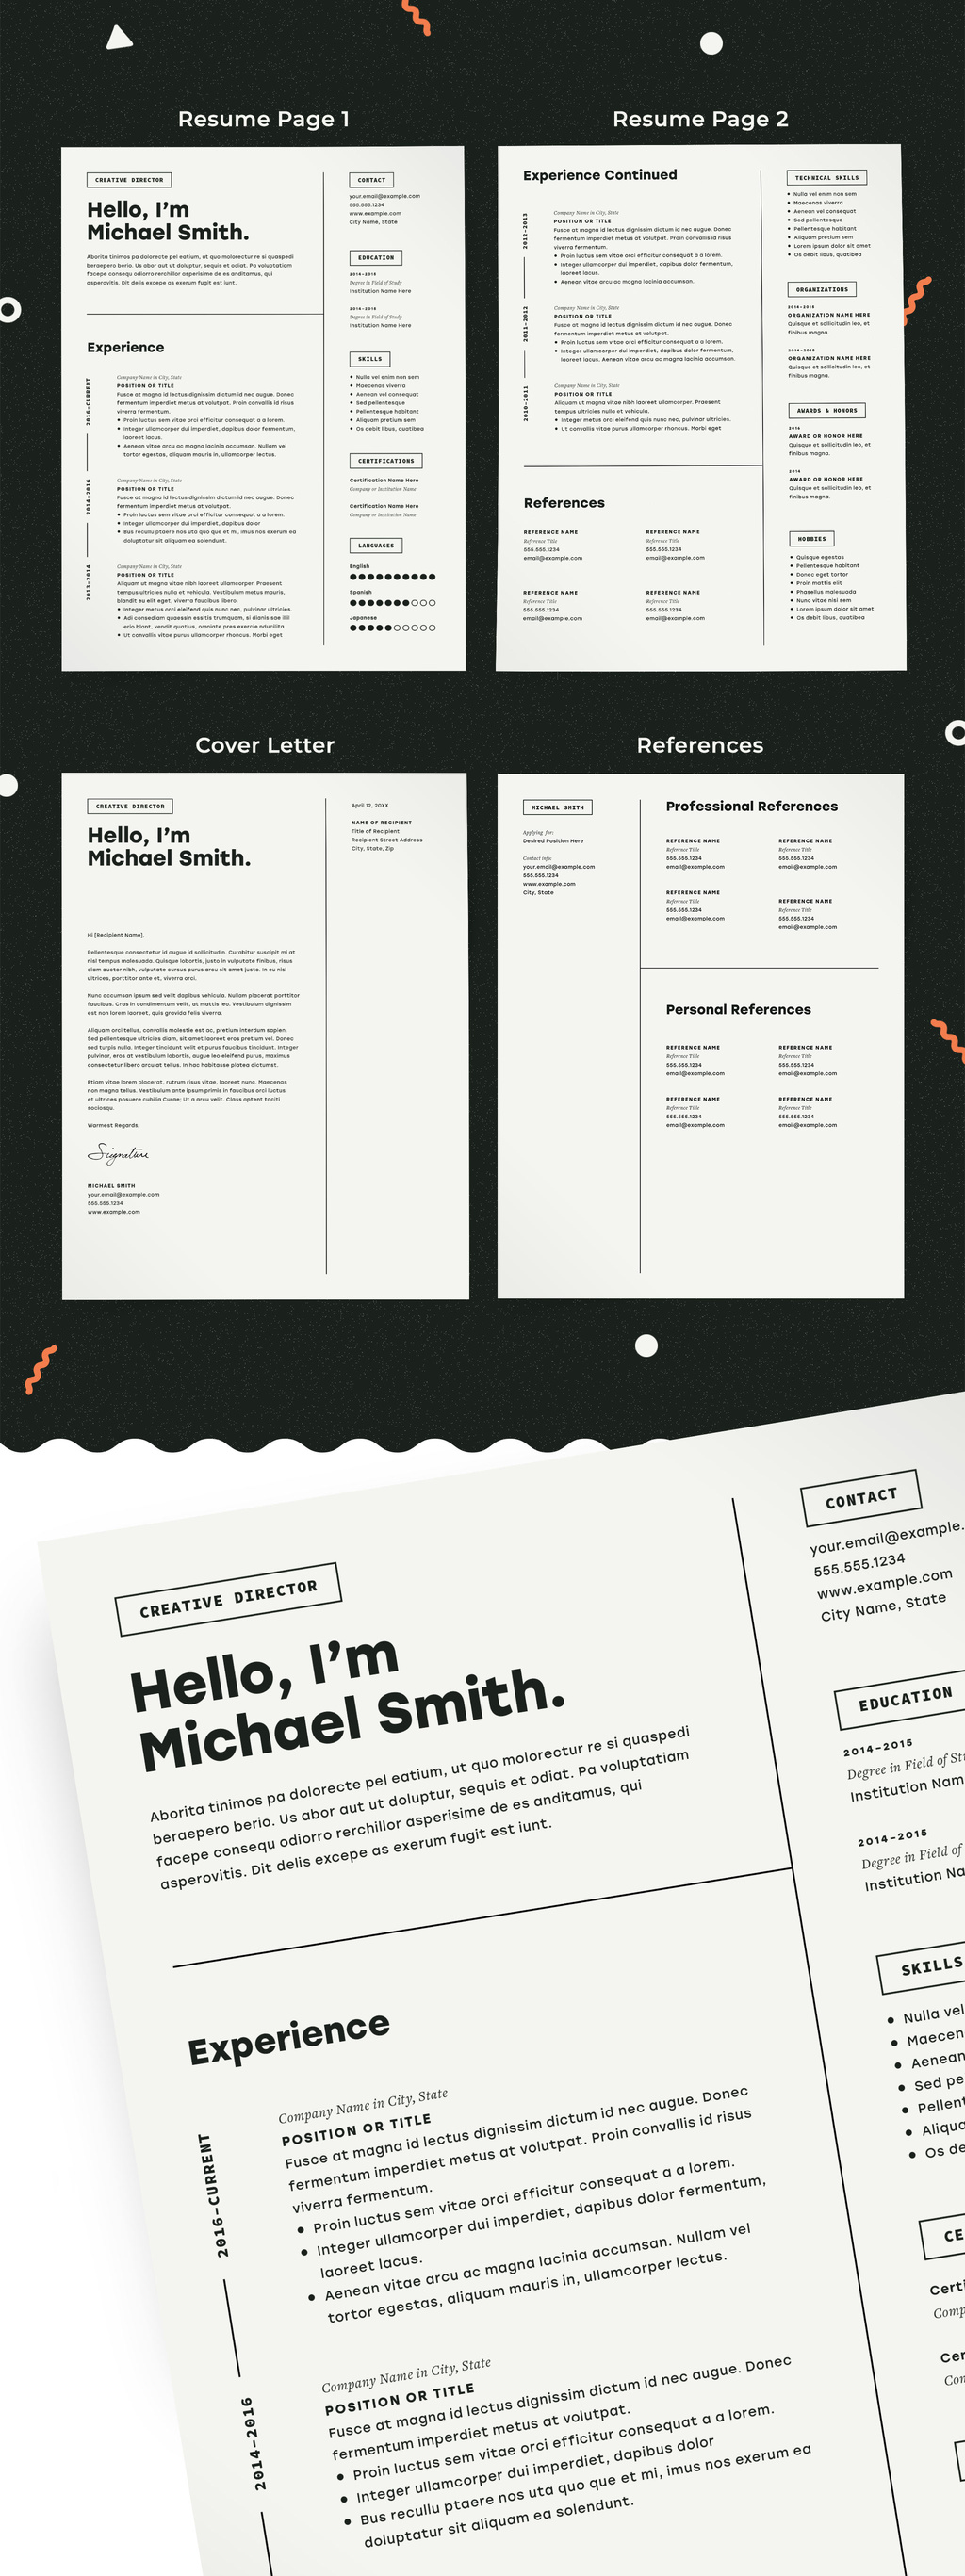 Black and white minimal resume template kit from @More Profesh.